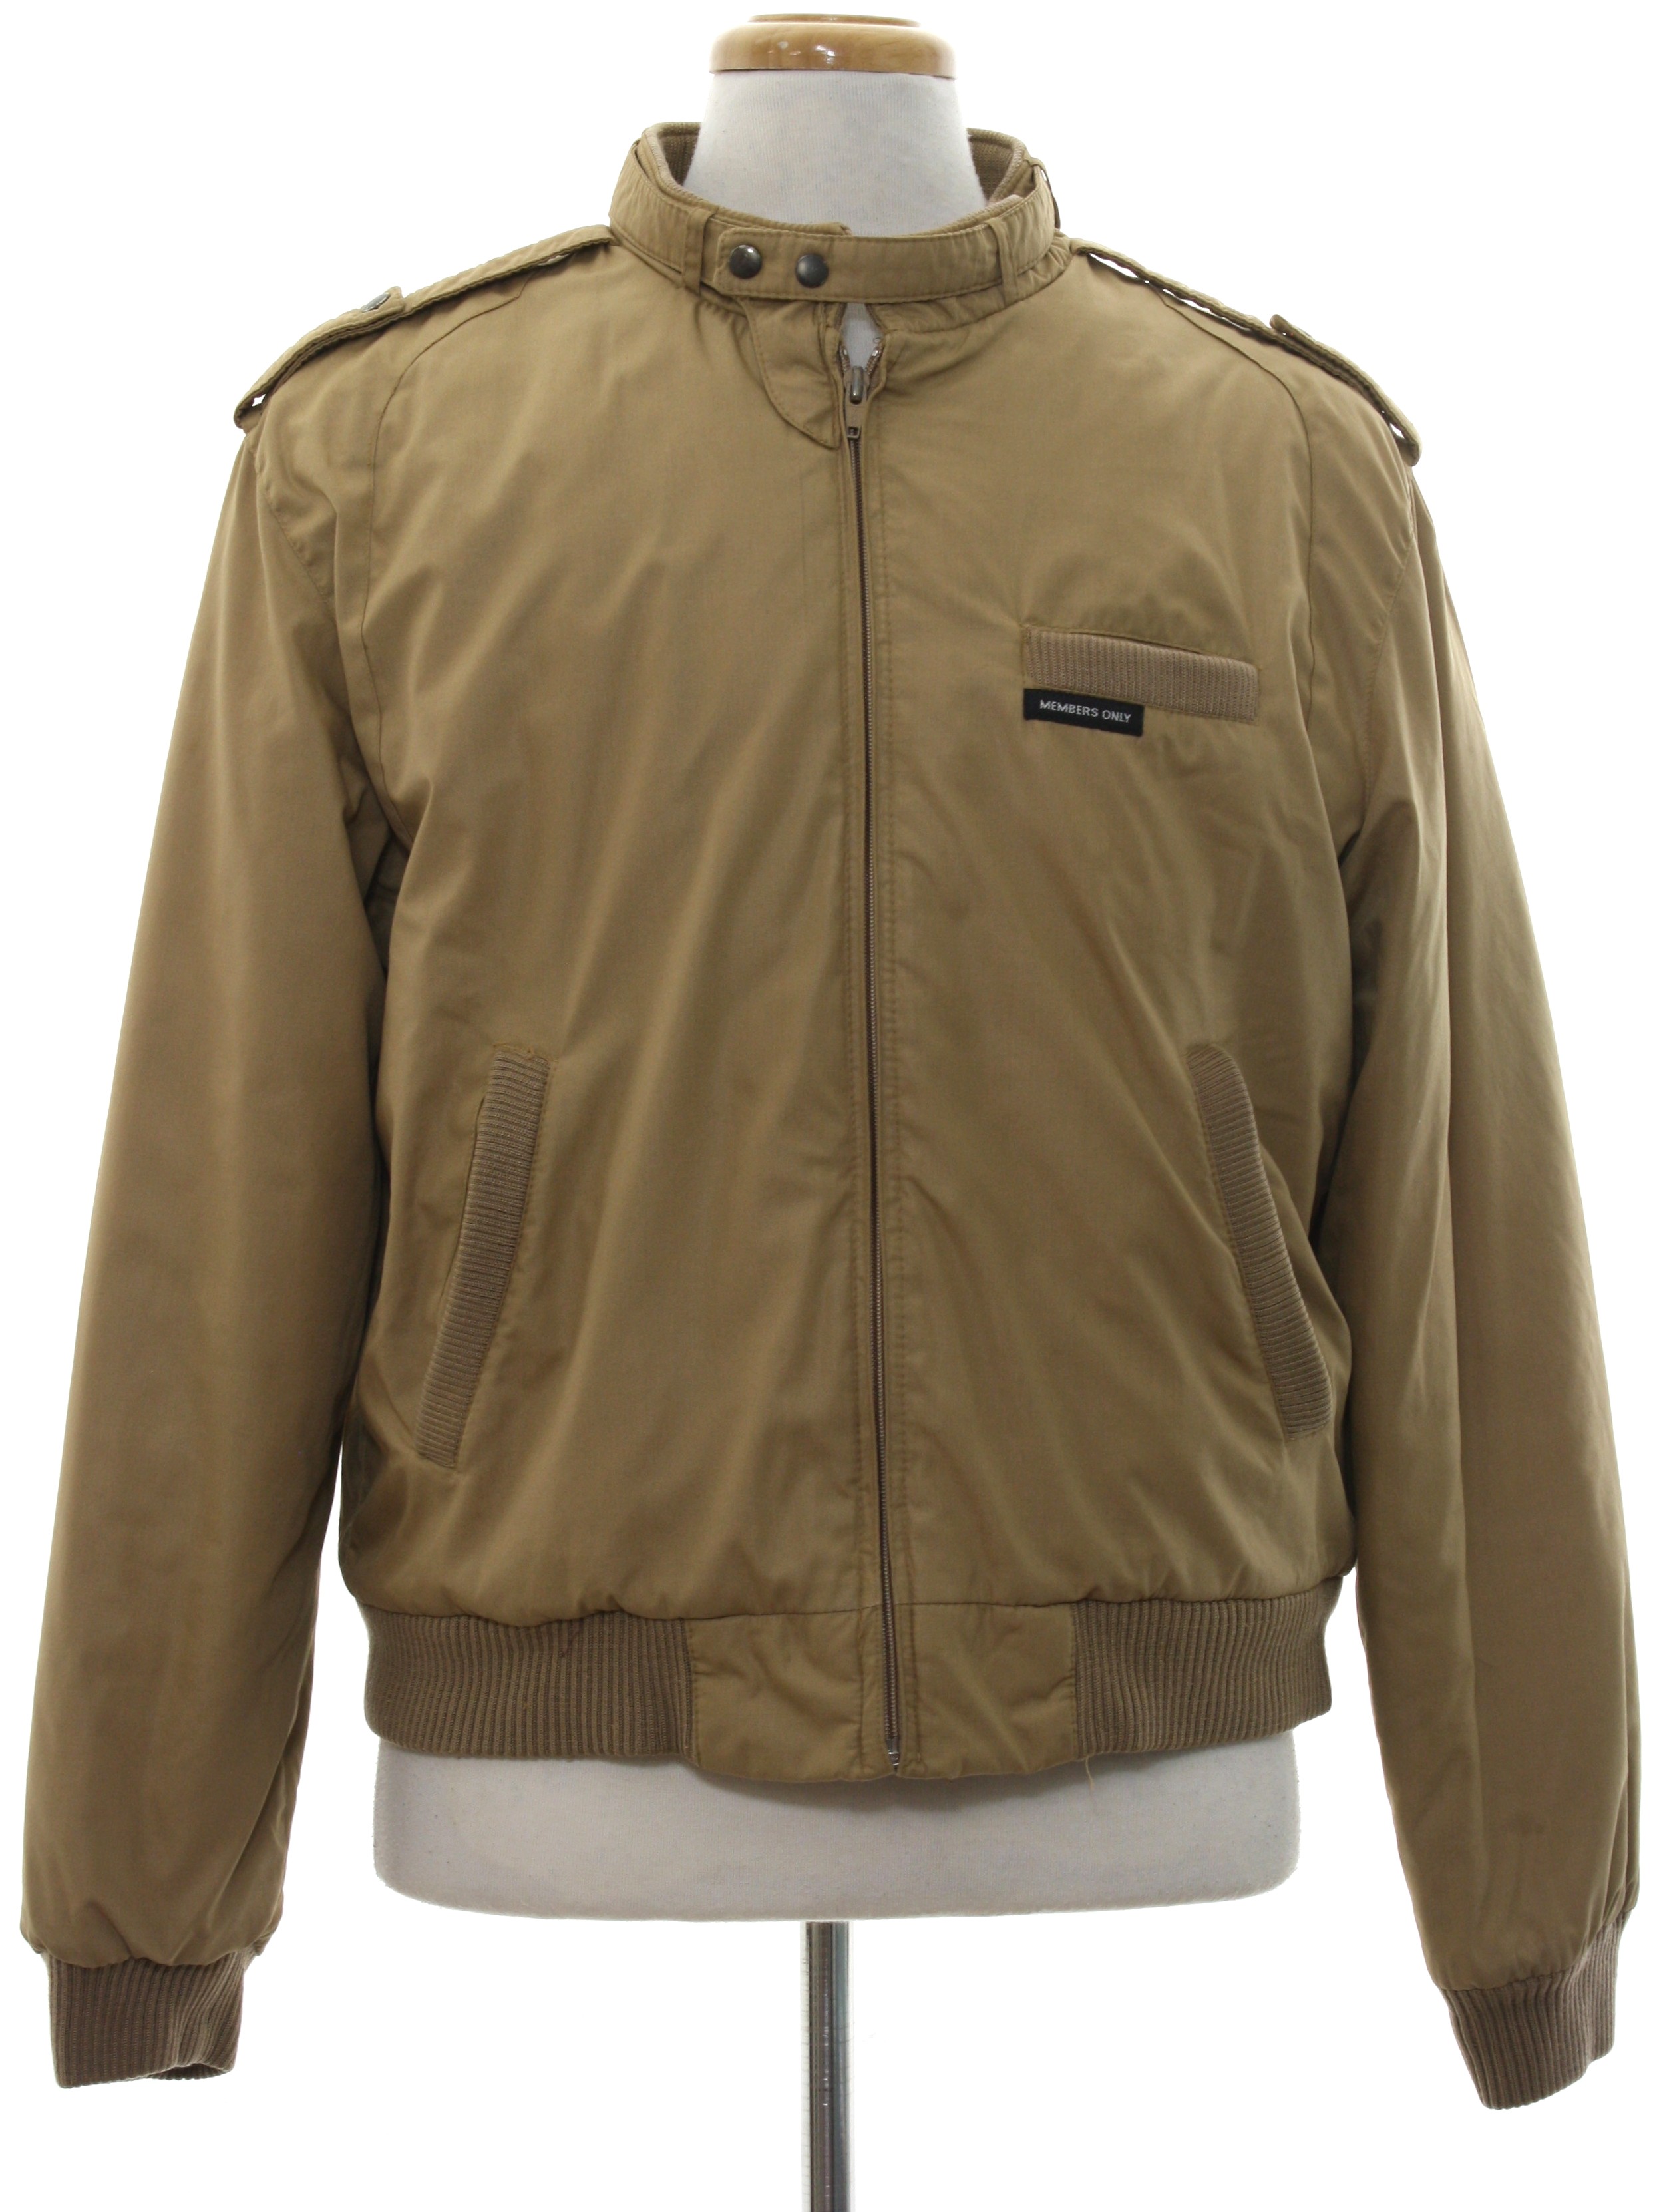 Retro 80s Jacket (Members Only) : 80s -Members Only- Mens tan polyester ...